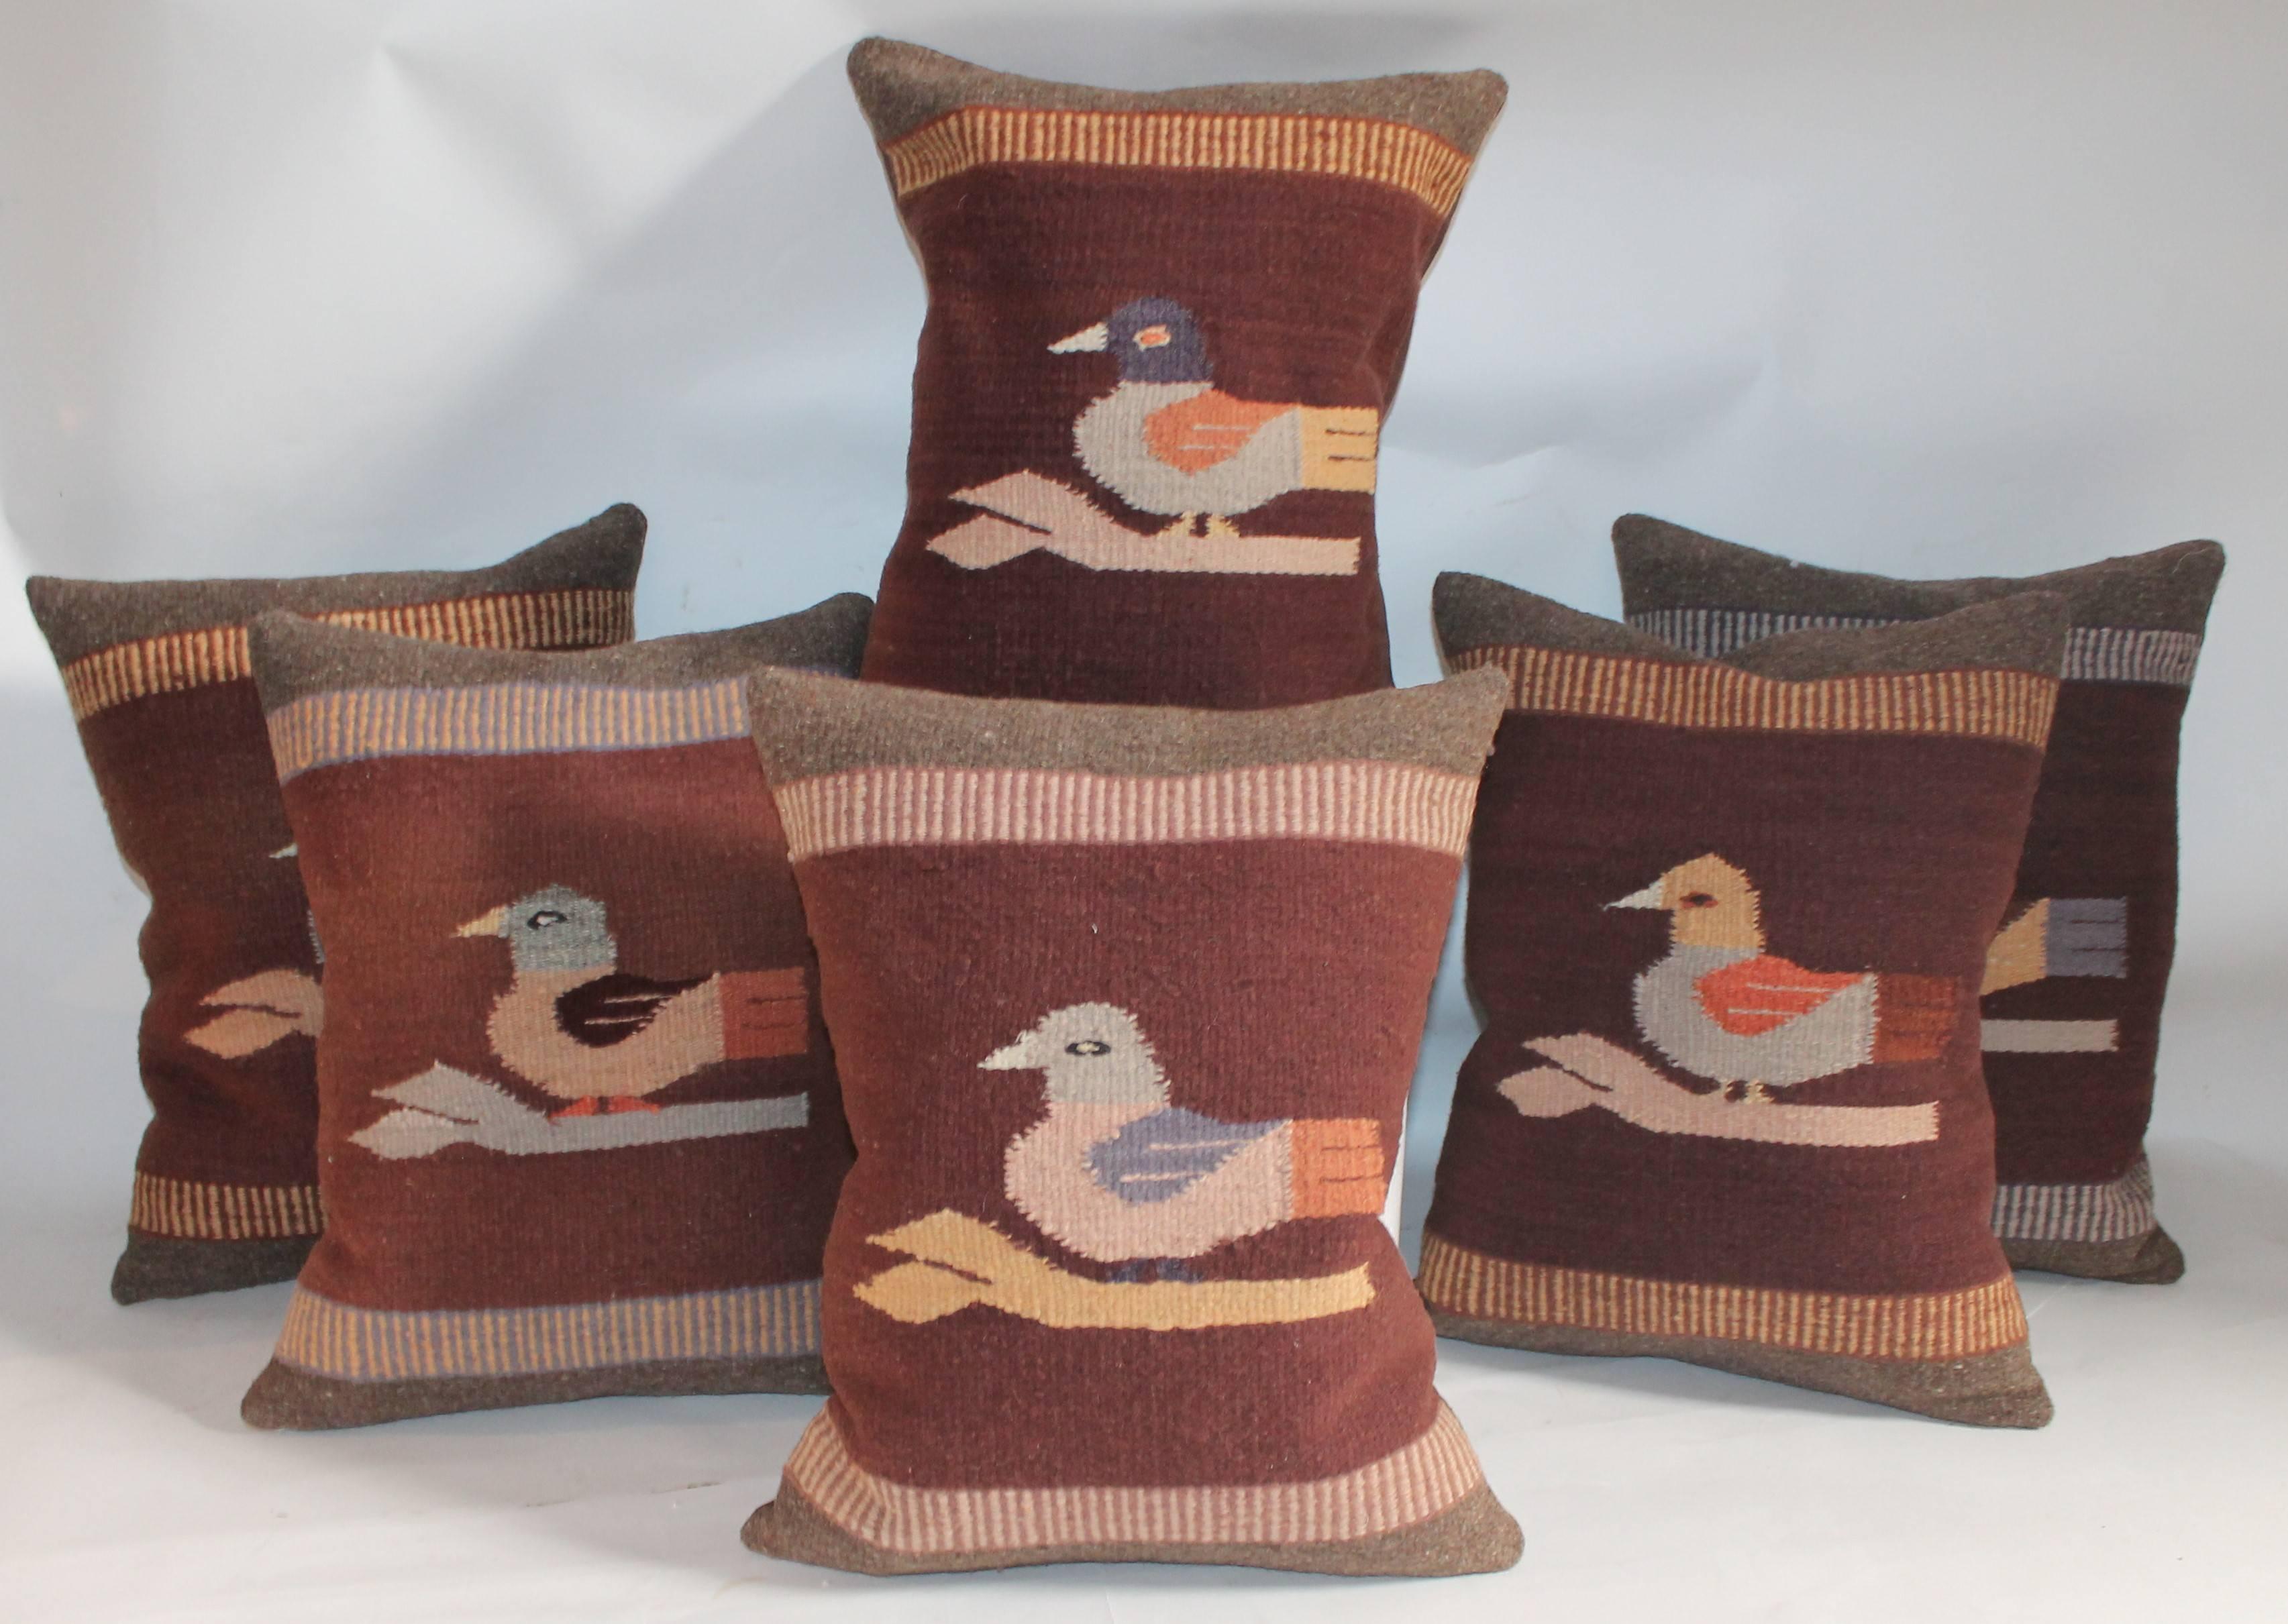 These amazing handwoven bird weaving pillows have brown cotton linen backings. Sold individually for $495. Each. They are in Fine condition. Total of six pillows in stock.